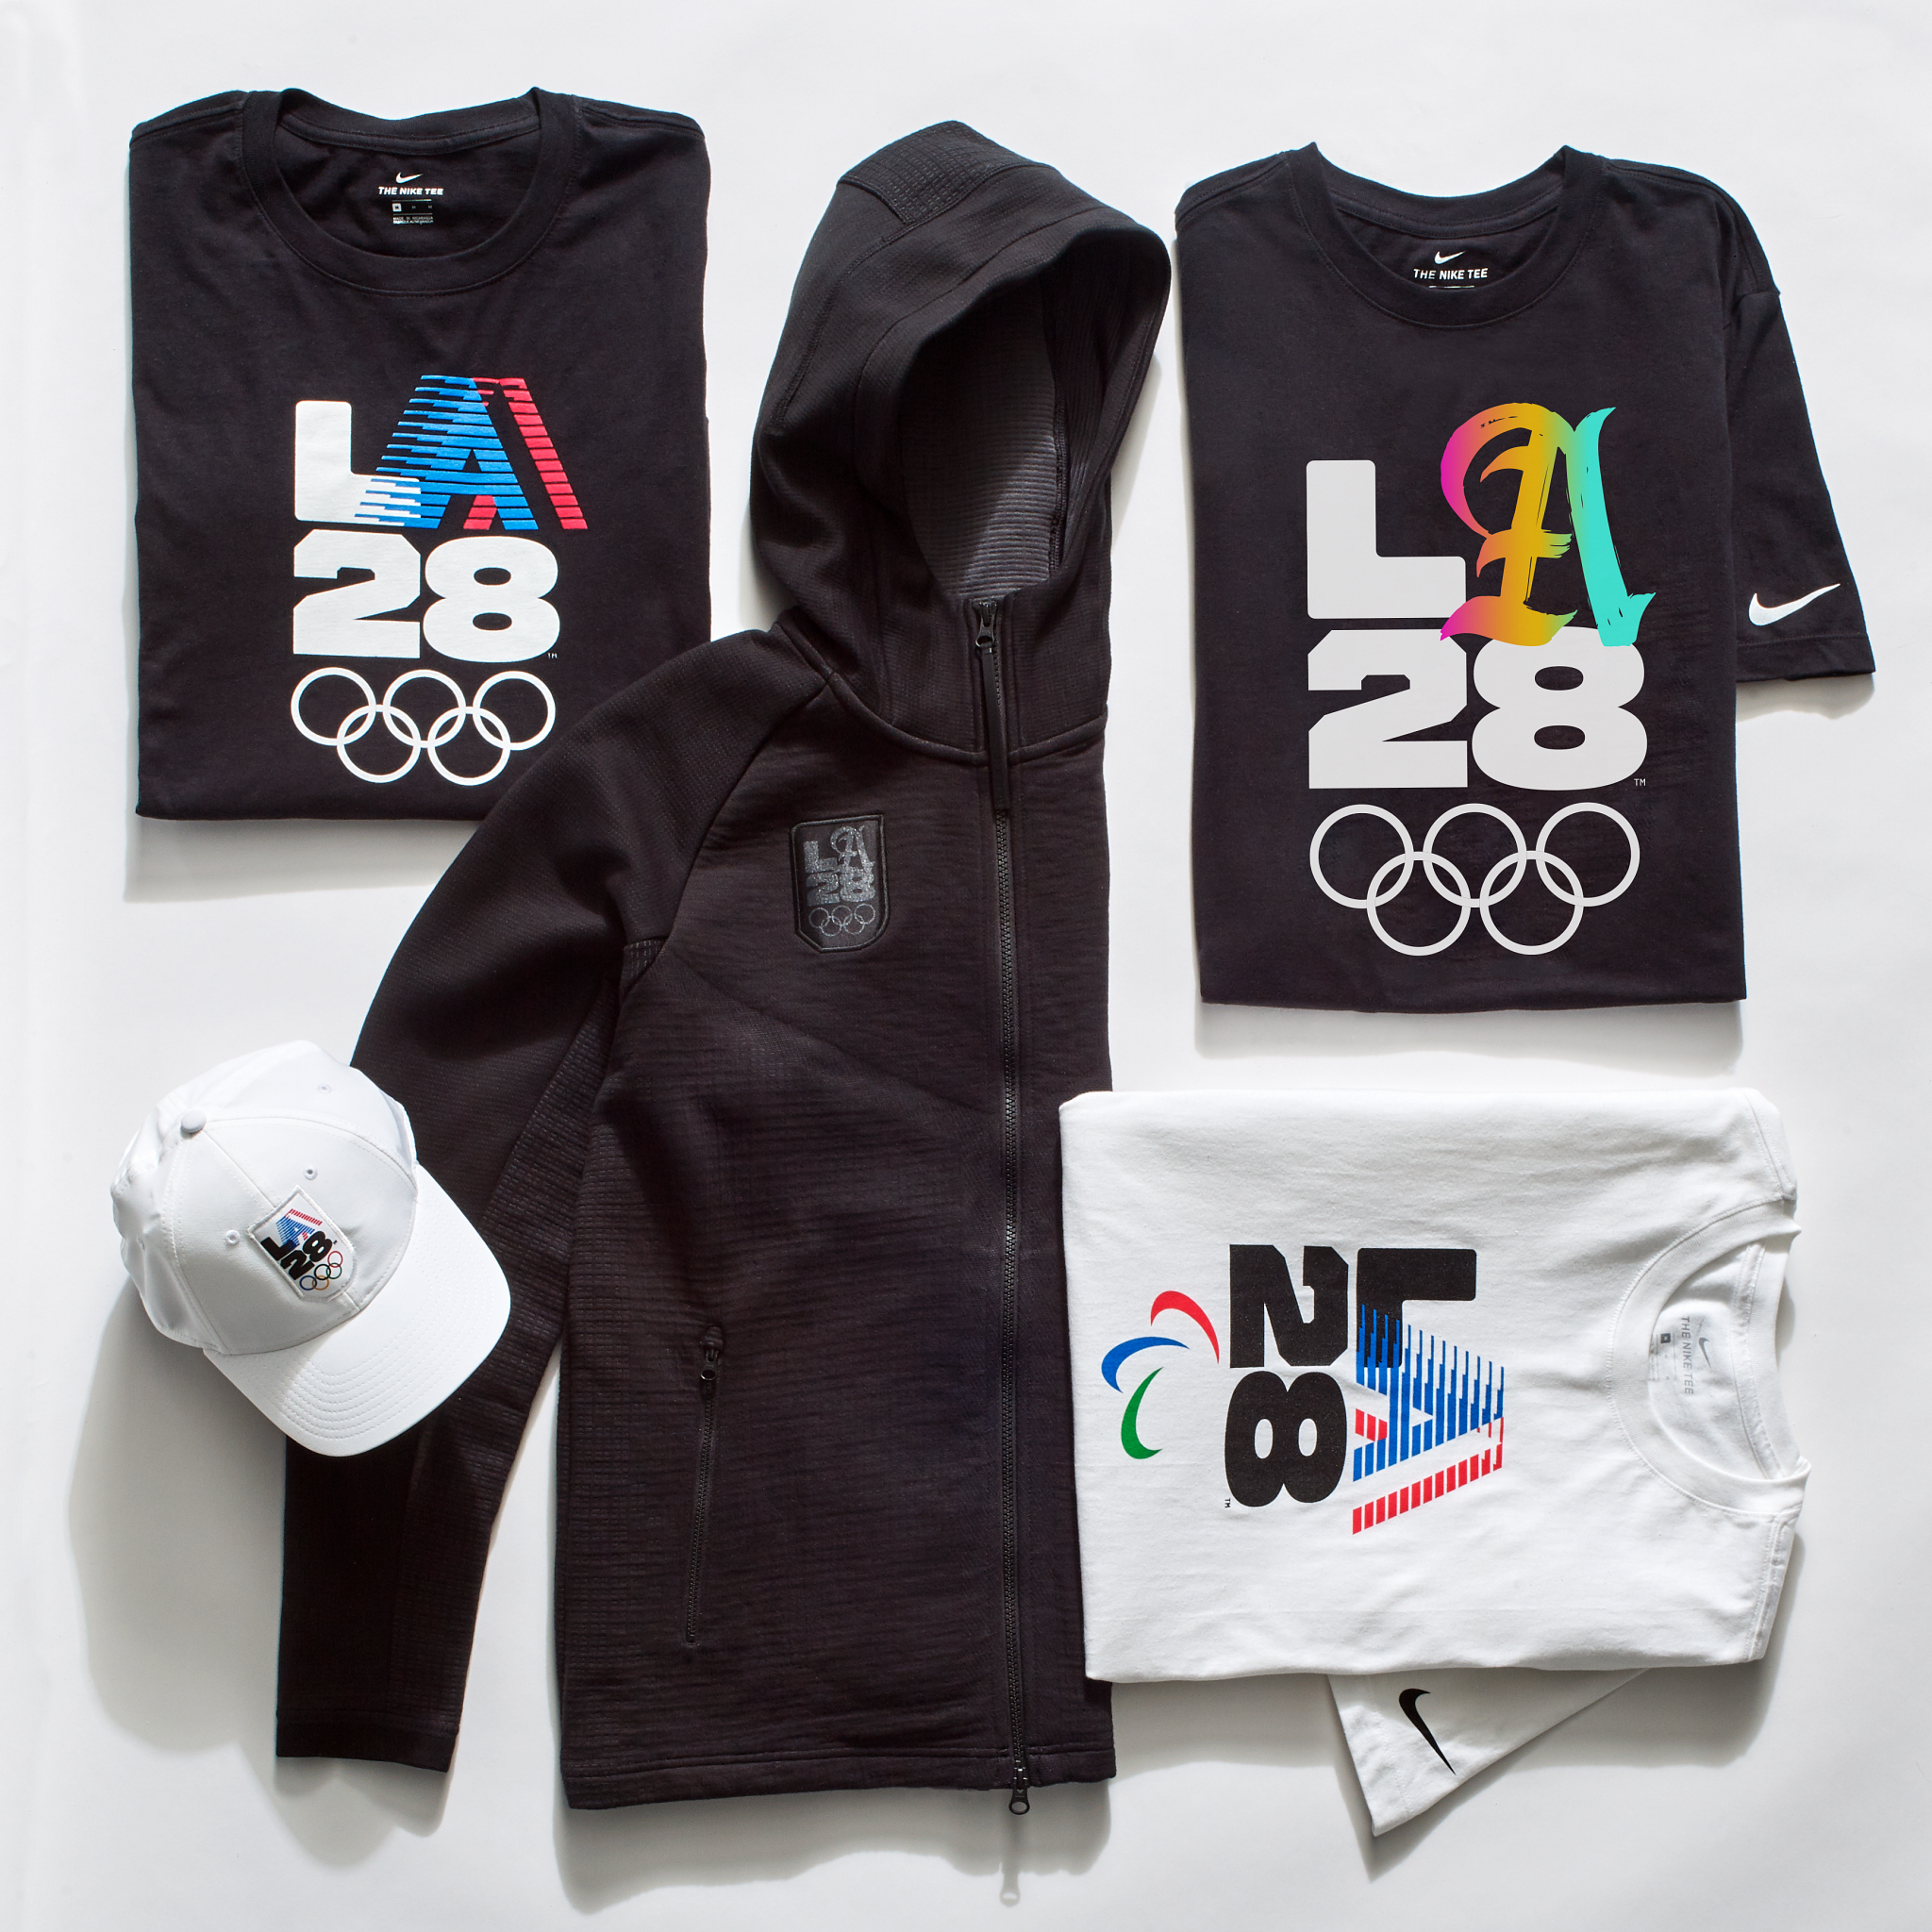 Nike-branded apparel is among merchandise available in the new Los Angeles 2028 shop ©LA28